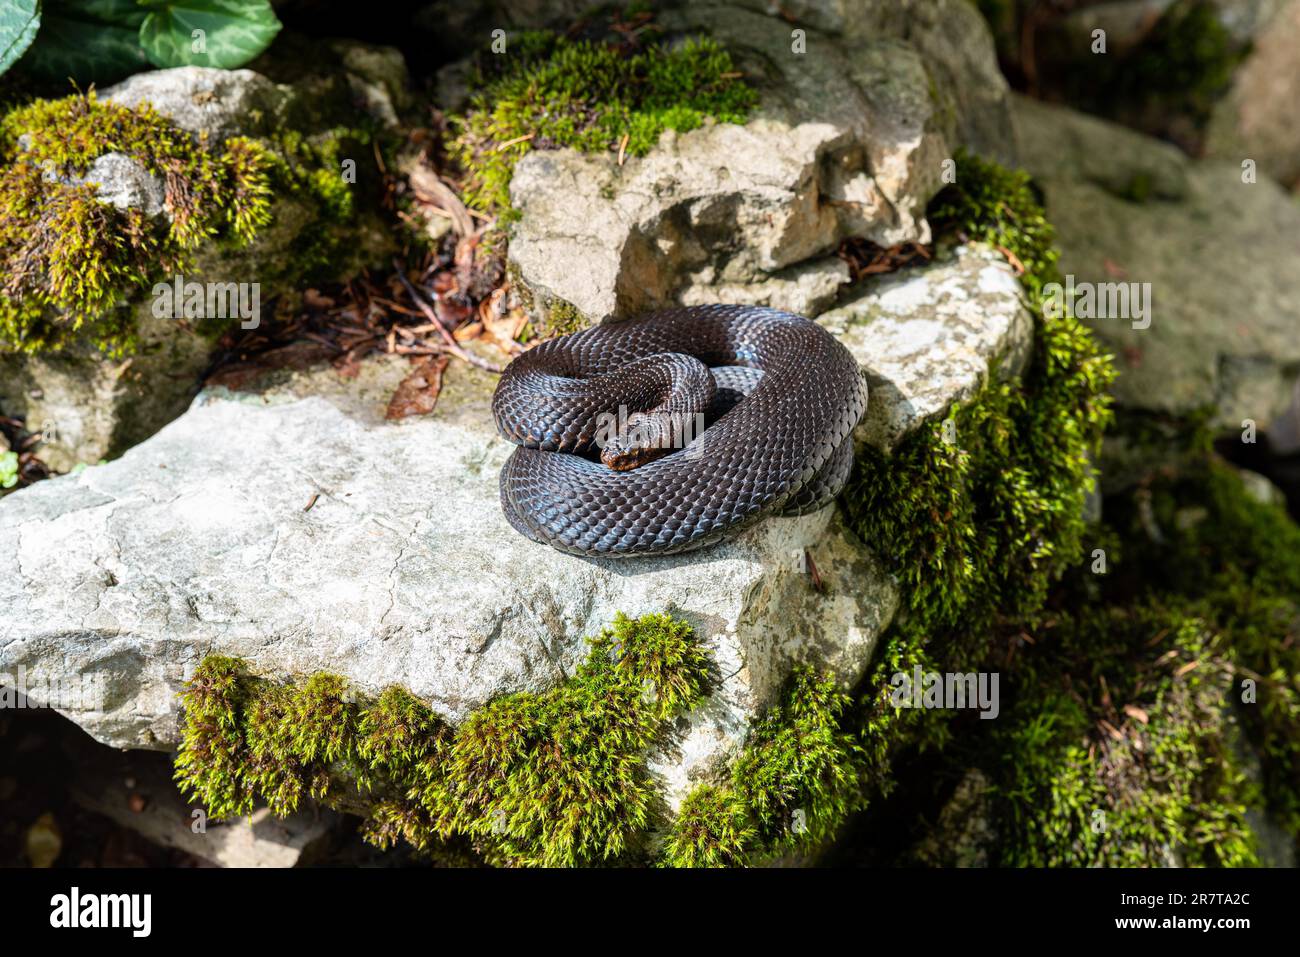 (Vipera) berus, the common European adder, is a venomous snake that is extremely widespread and can be found throughout most of central and eastern Stock Photo